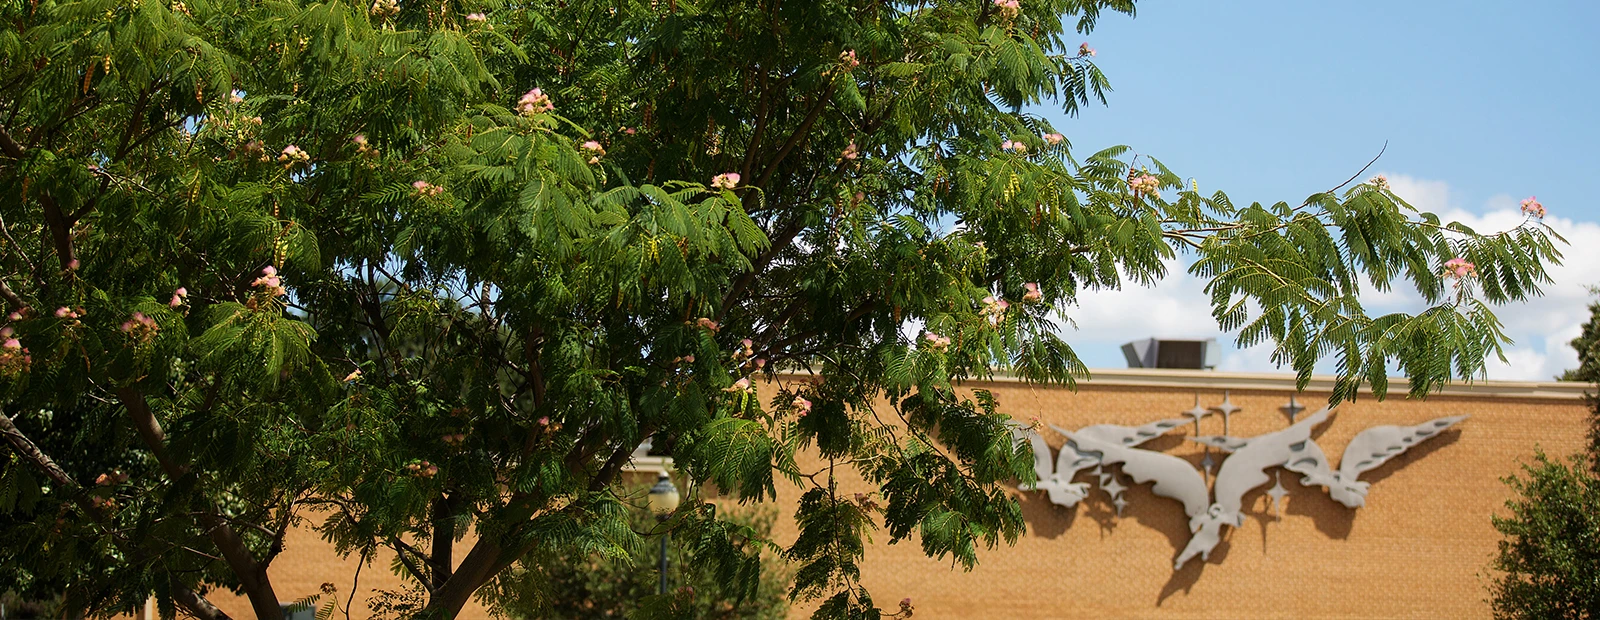 A photo of a tree with green leaves and pink flowers in front of a light tan, bricked building with three silver angels on it.